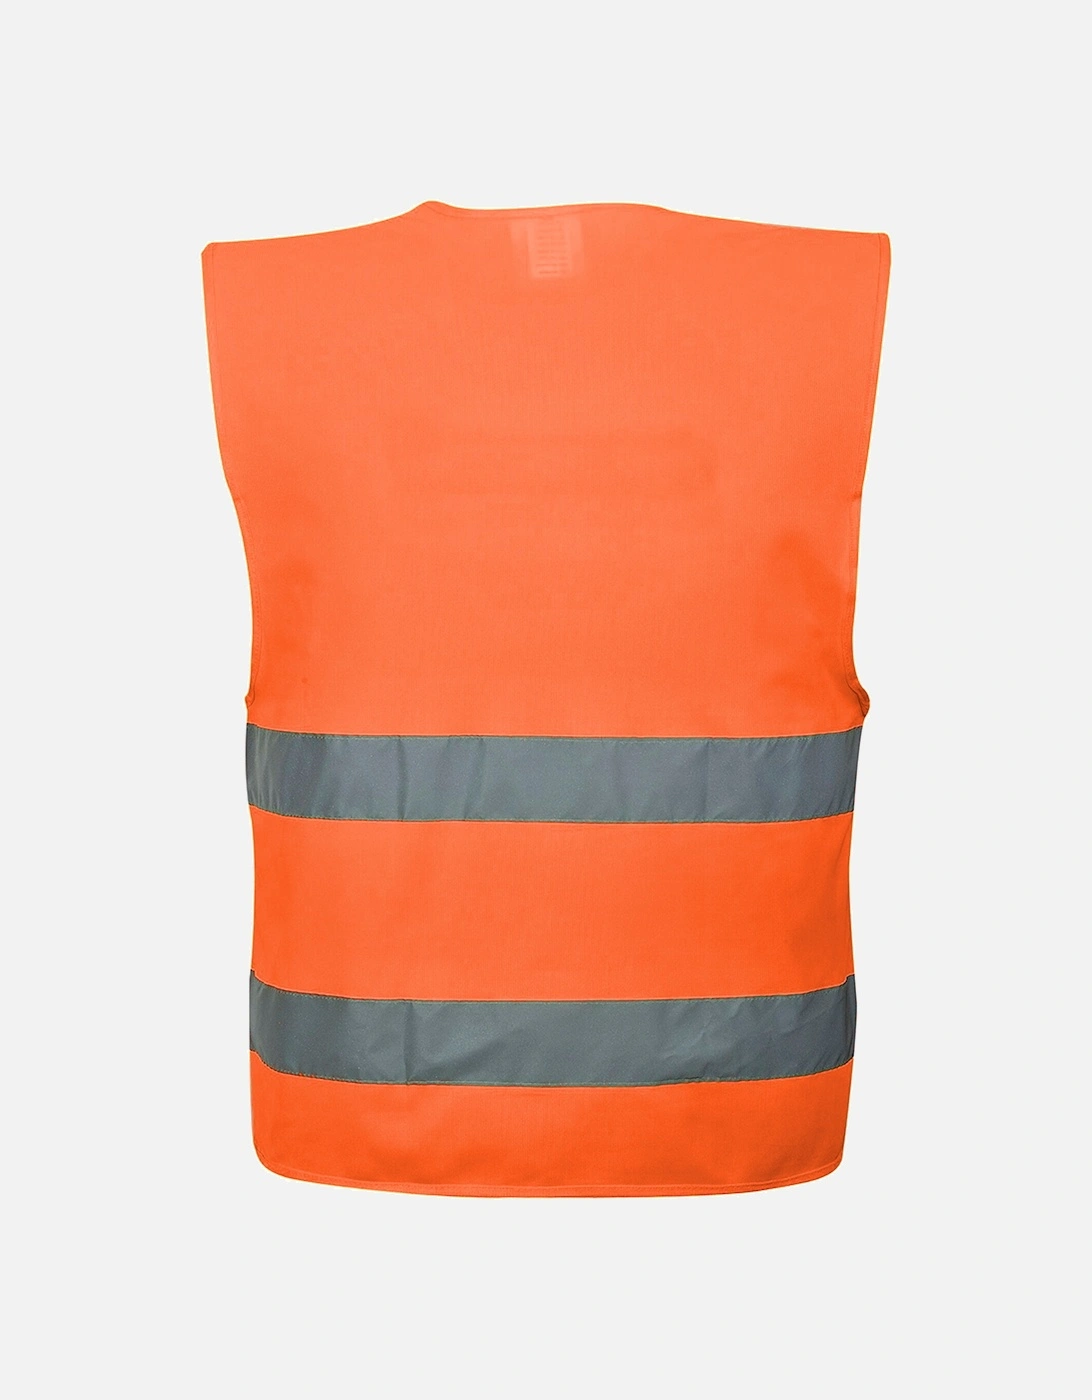 Unisex High Visibility Two Band Safety Work Vest